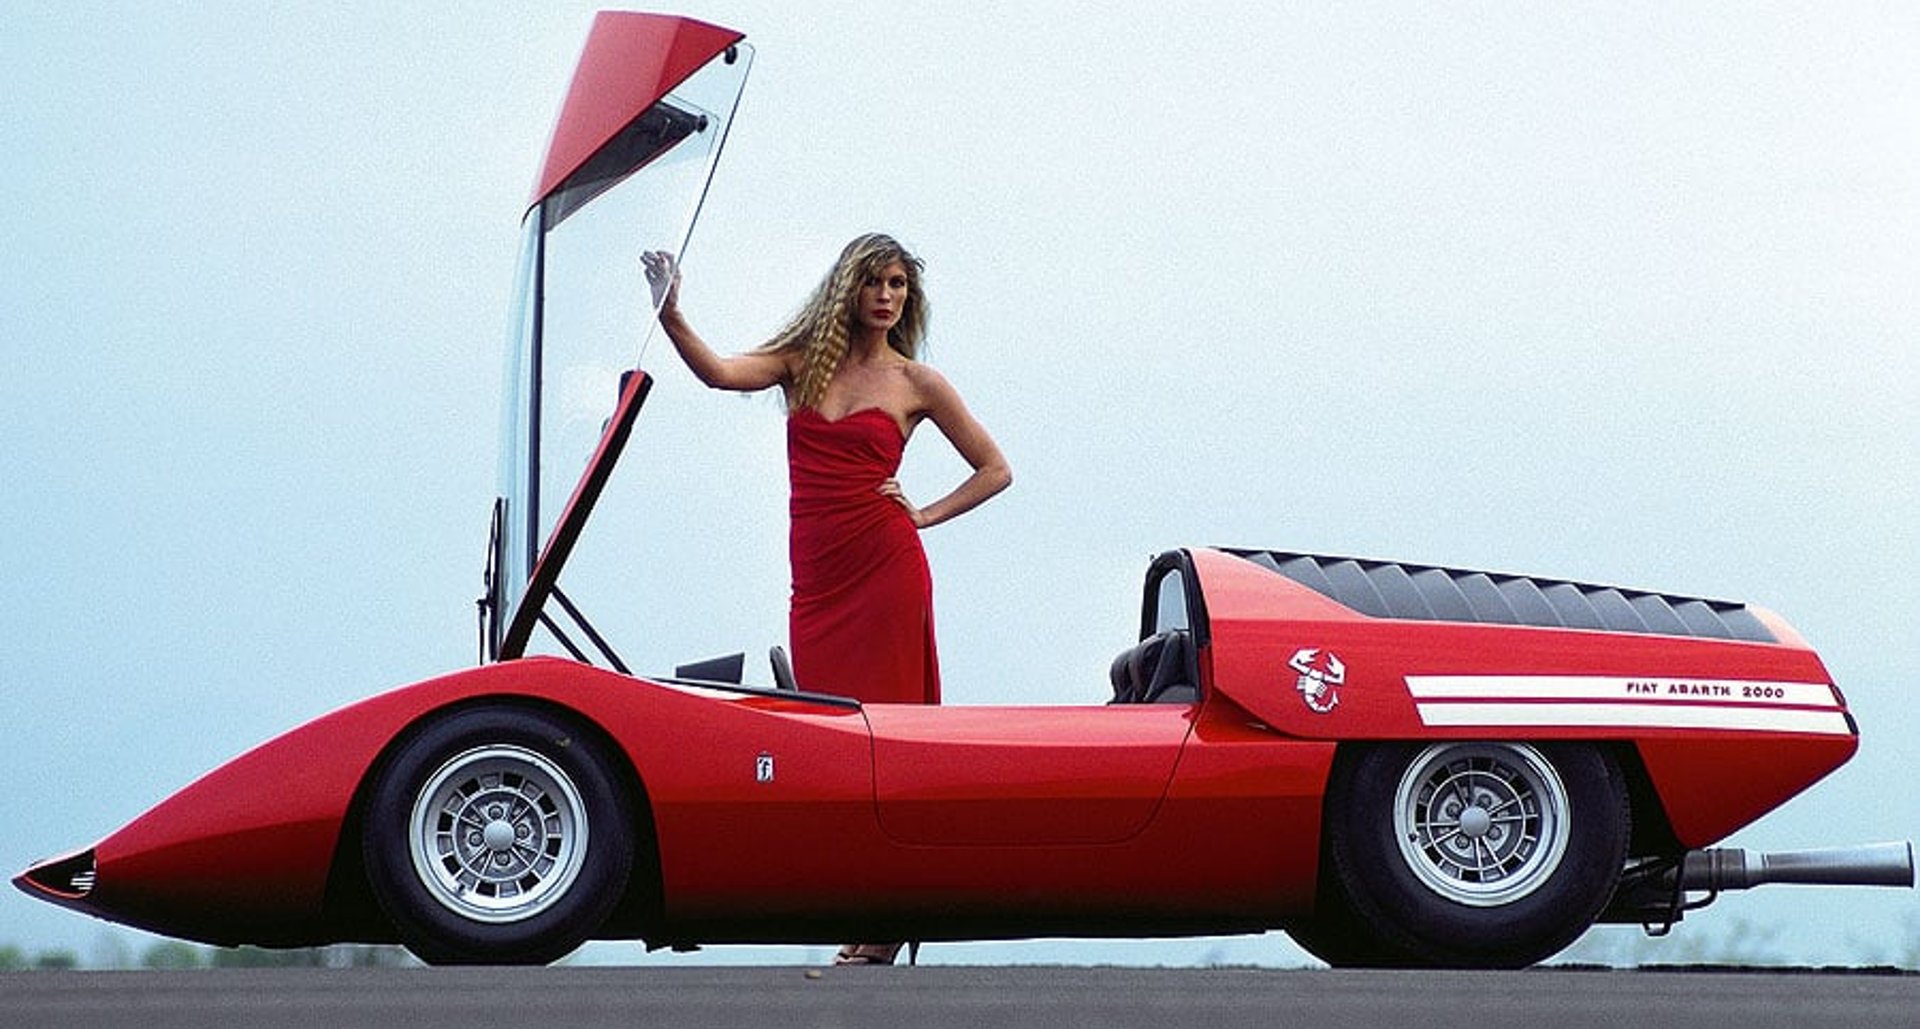 Gentleman's Library: '70s Concept Cars - Yesterday's Dreams of the